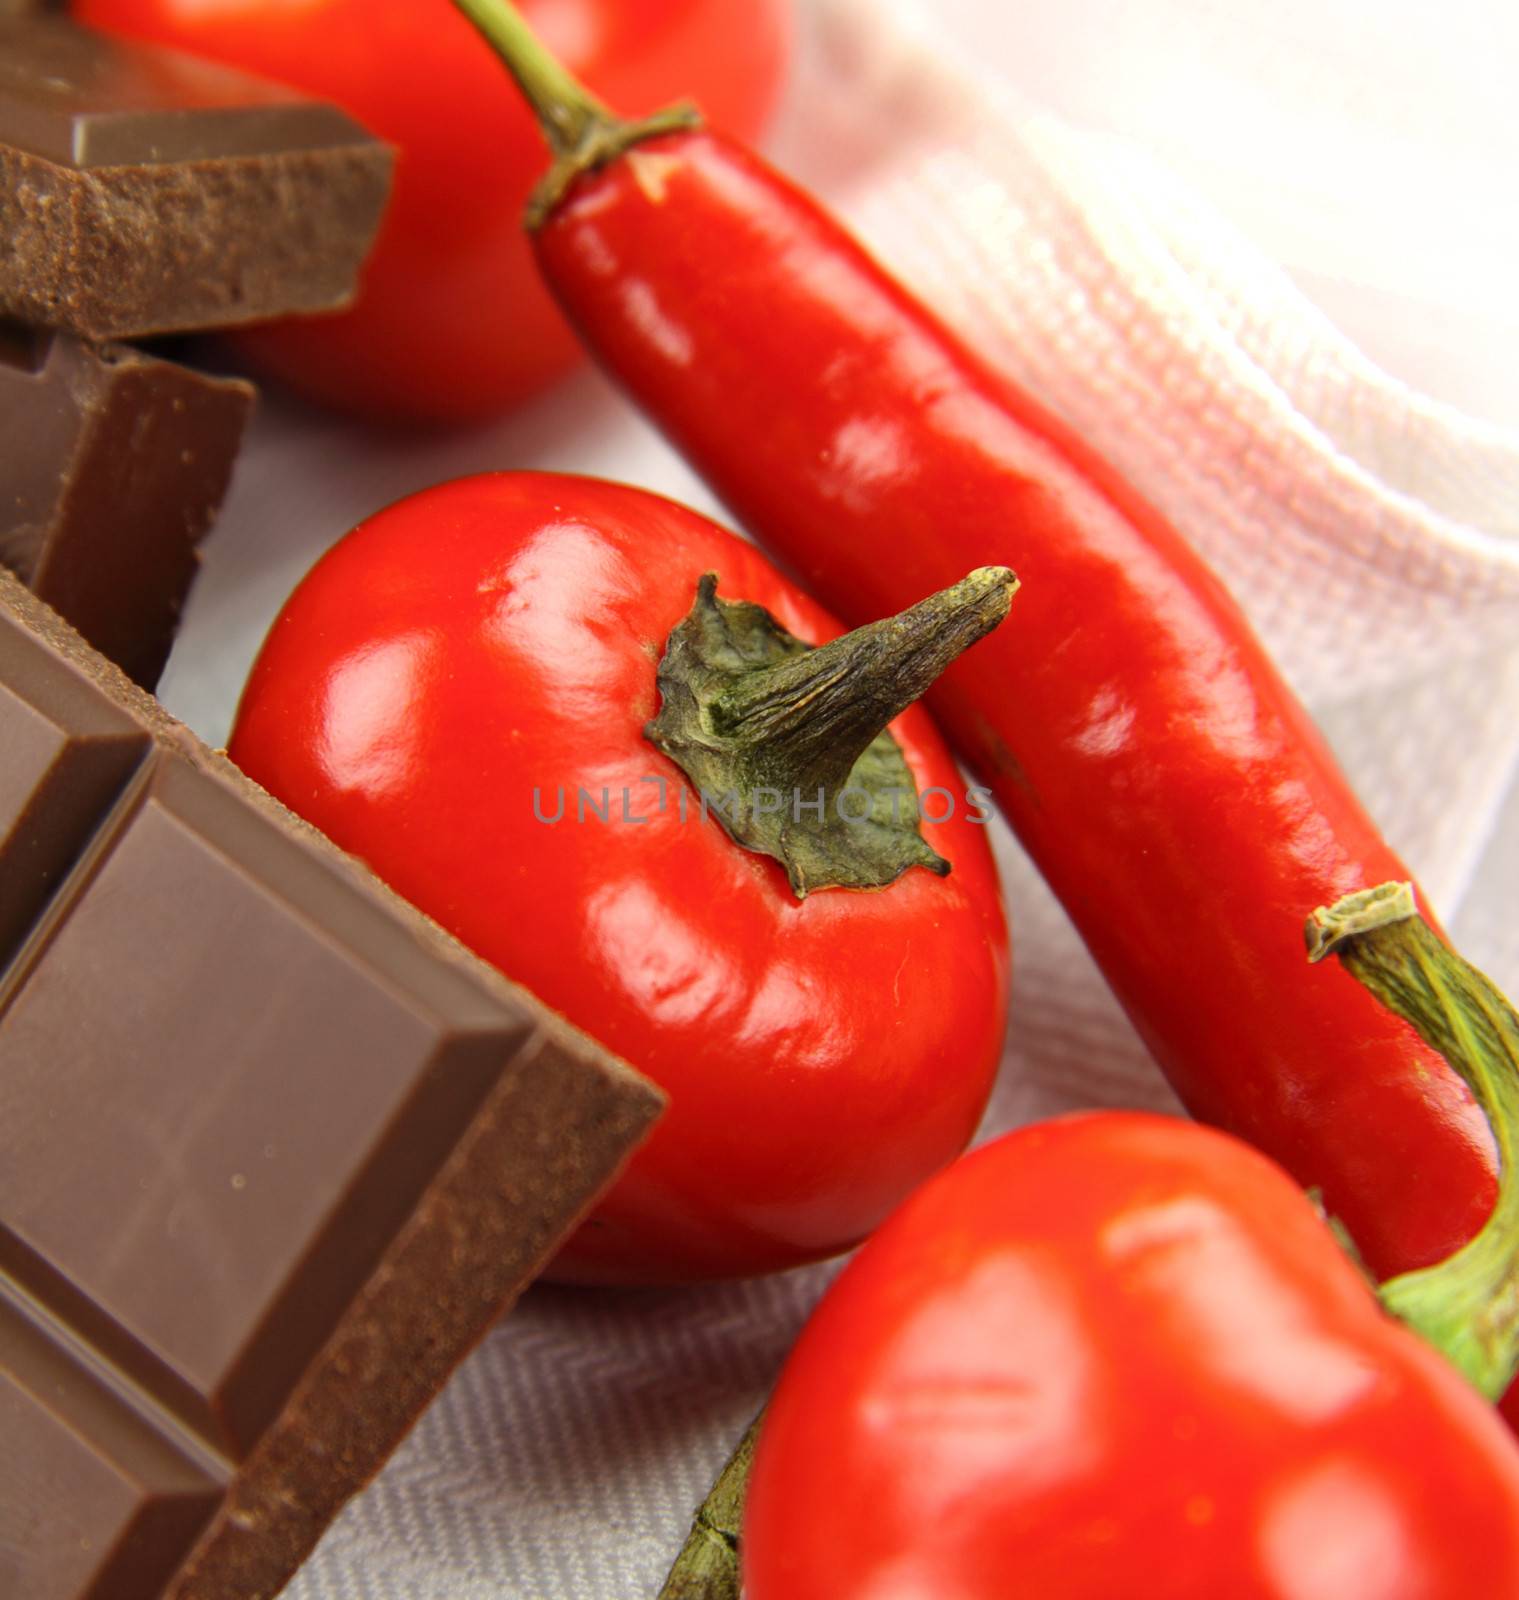 Delicious dark chocolate with a selection of different chilies and peppers.